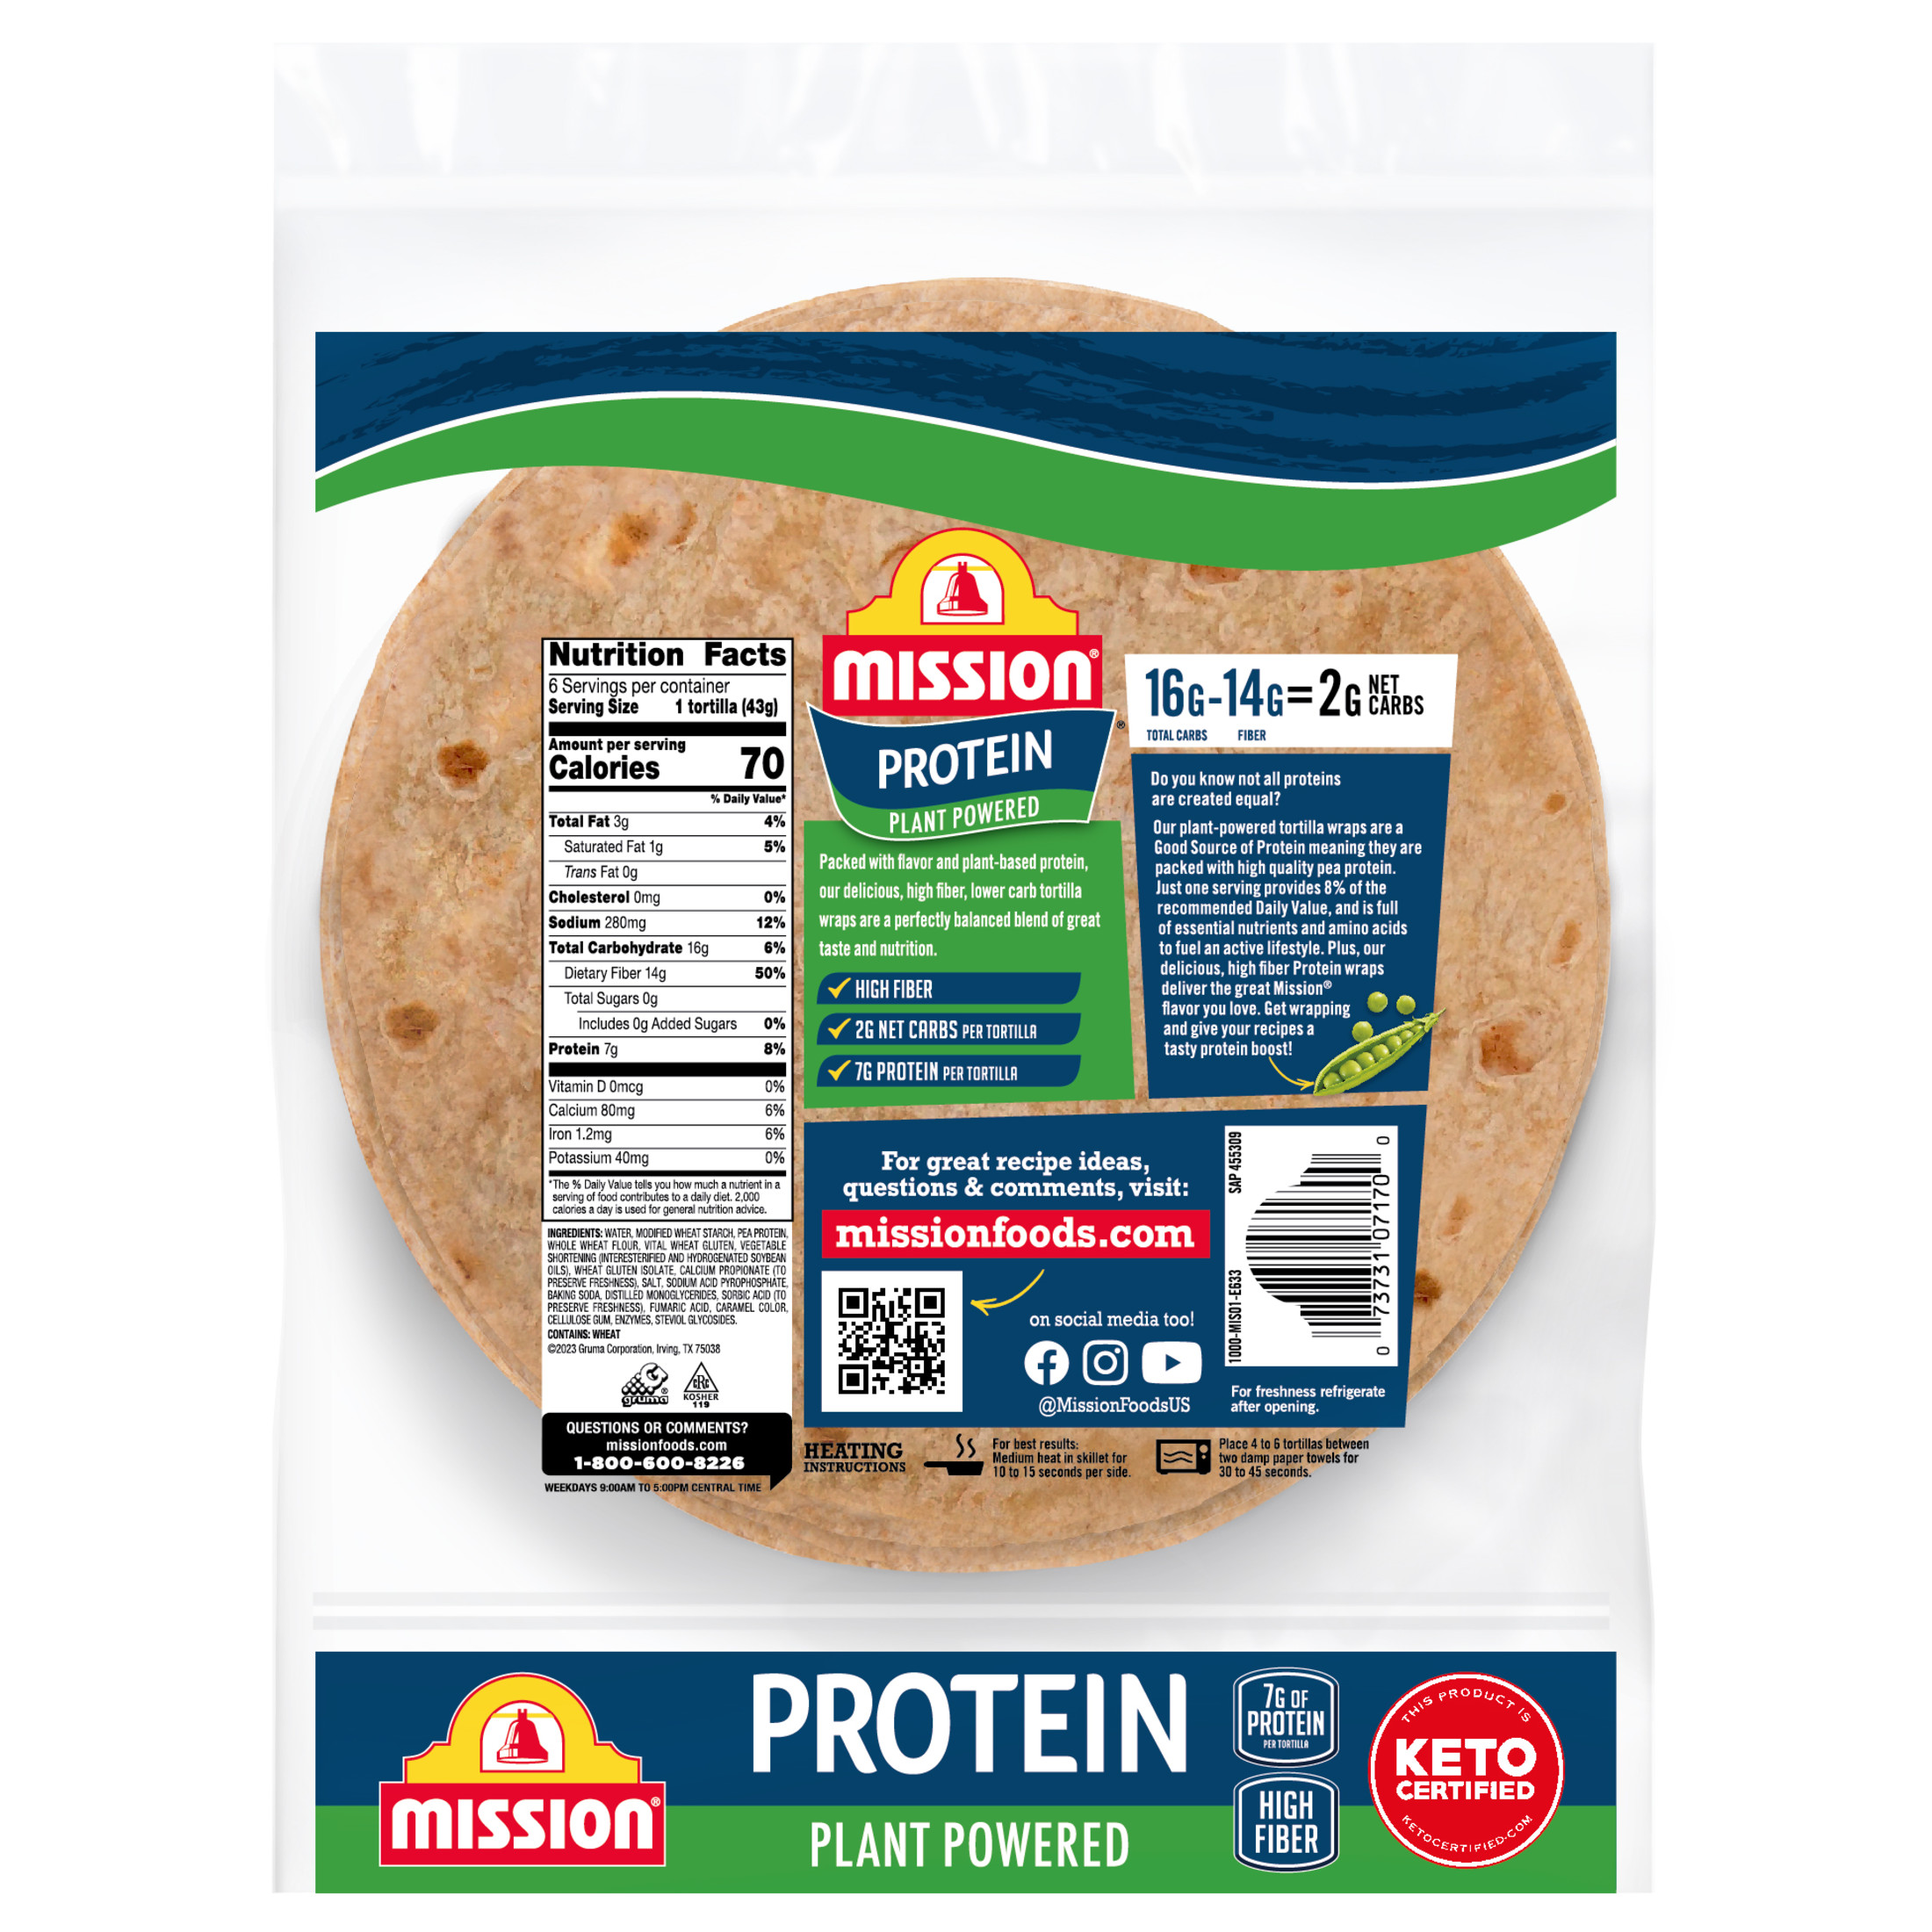 Mission Super Soft Protein Plant Powered Tortilla Wraps, 9 oz, 6 Count - image 3 of 11